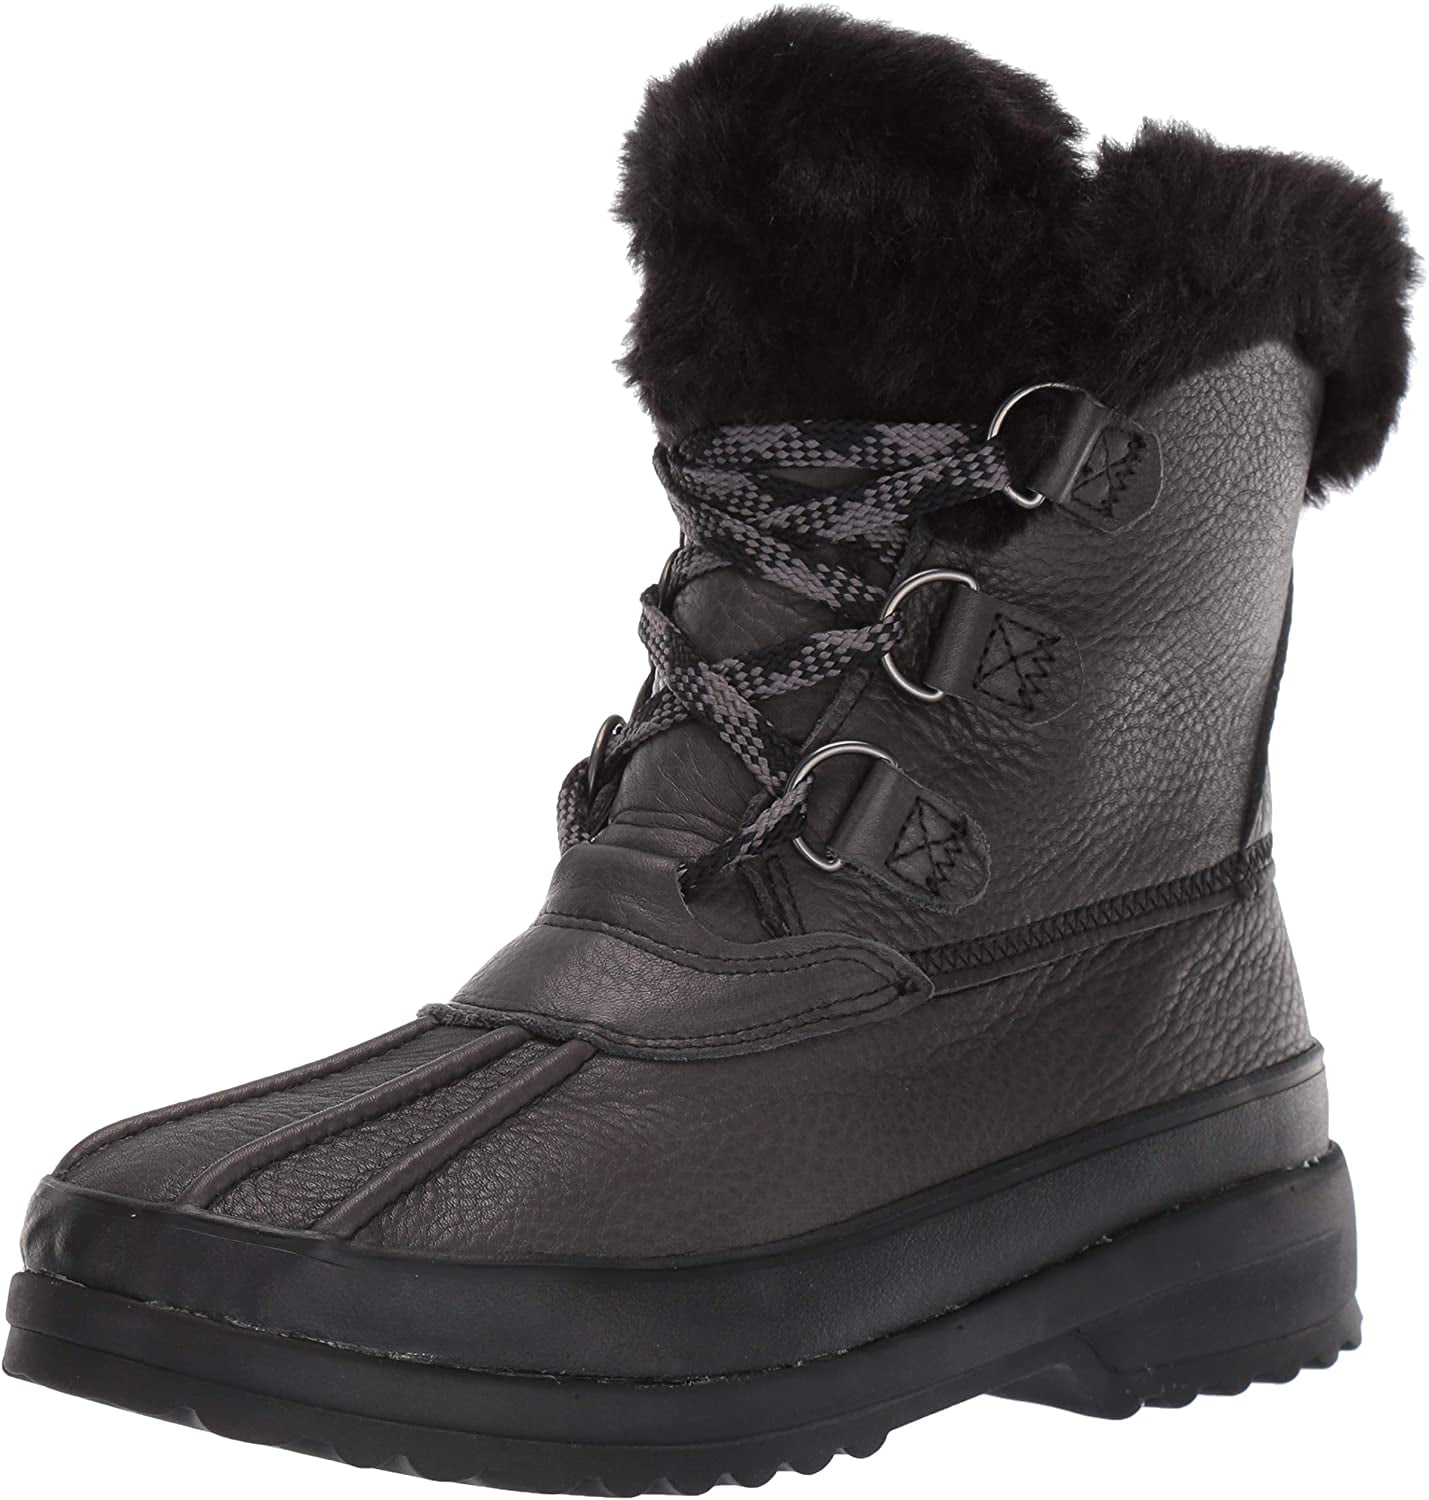 sperry womens leather boots